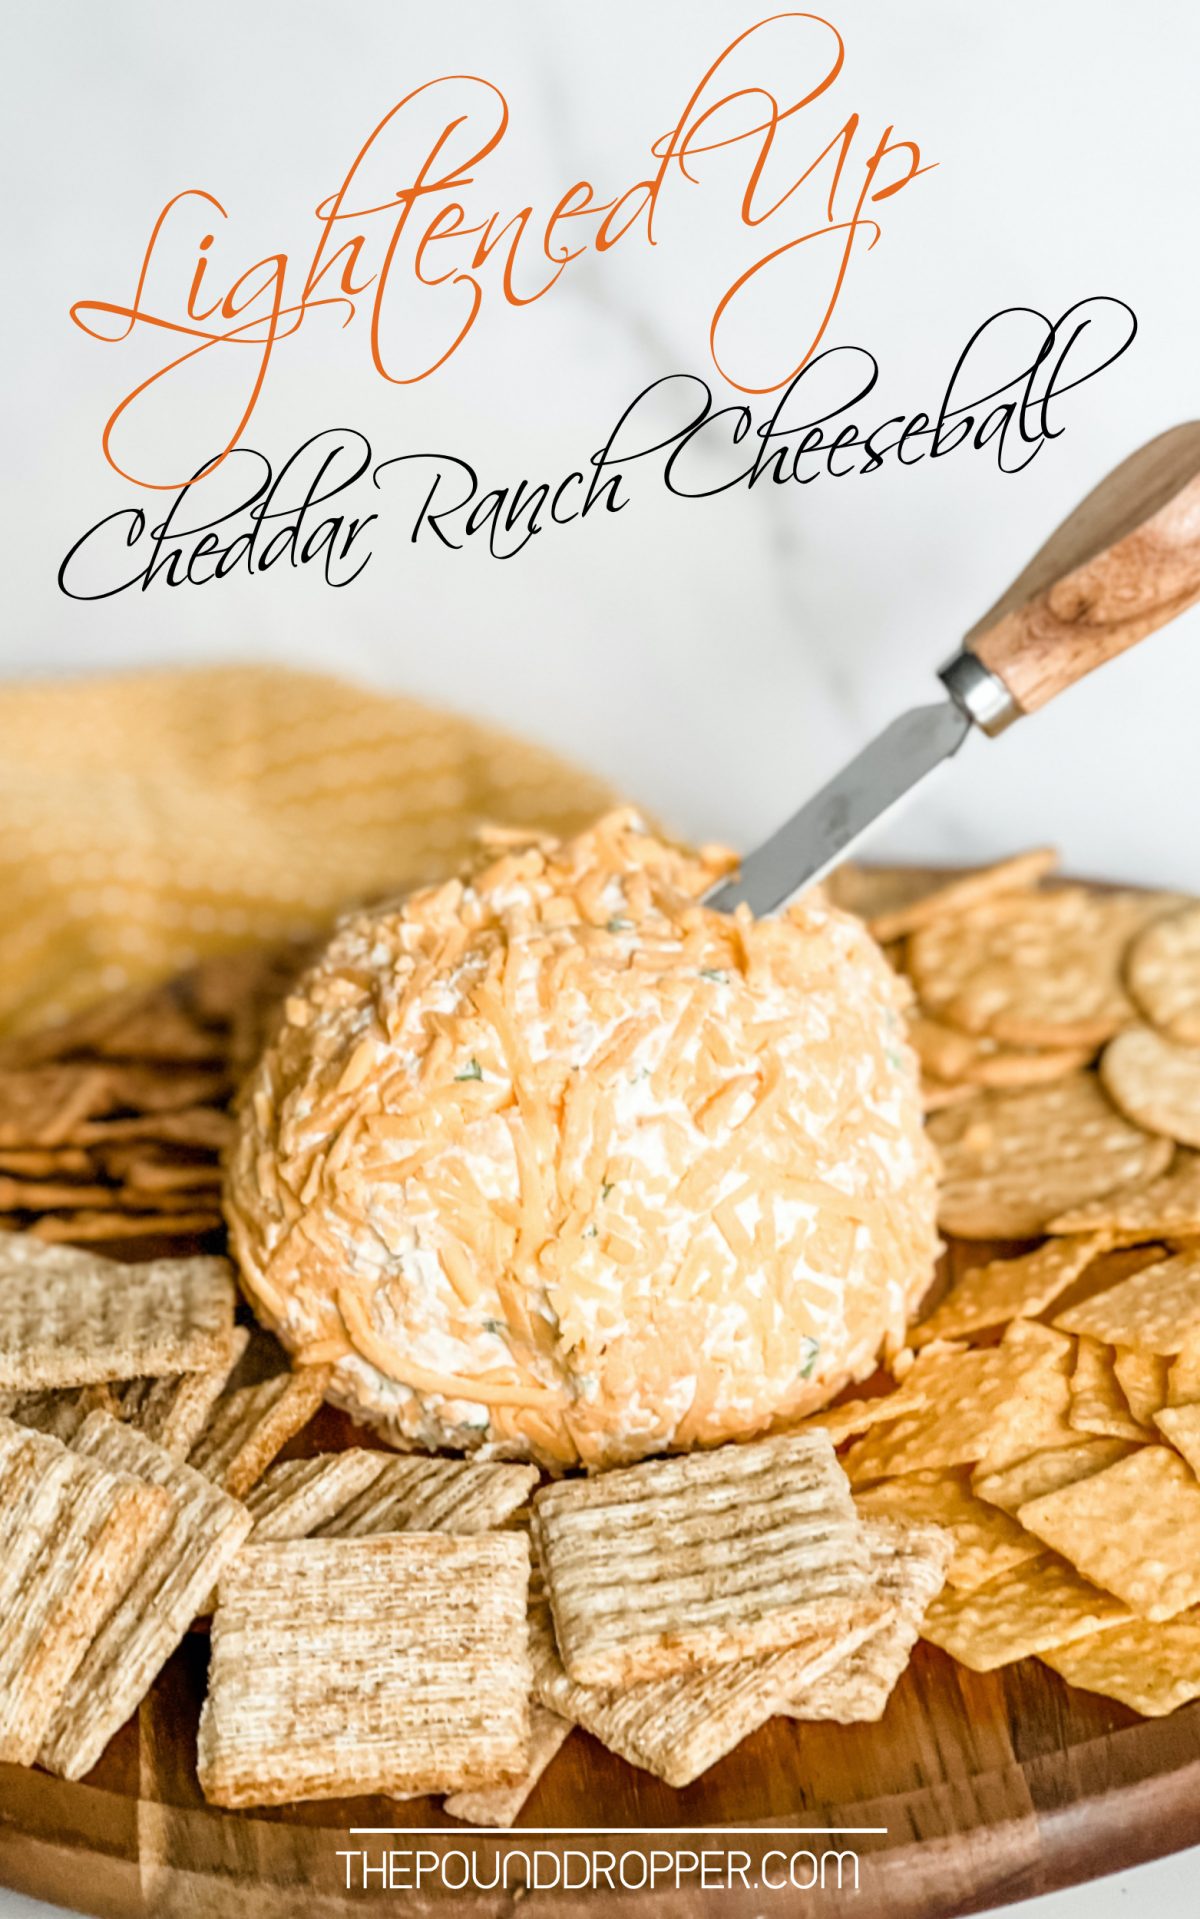 This Cheddar Ranch Cheeseball recipe is so easy and SO good! It’s lightened up using laughing cow cheese wedges vs. cream cheese and all you need to do is mix together the ingredients and form into a ball! via @pounddropper